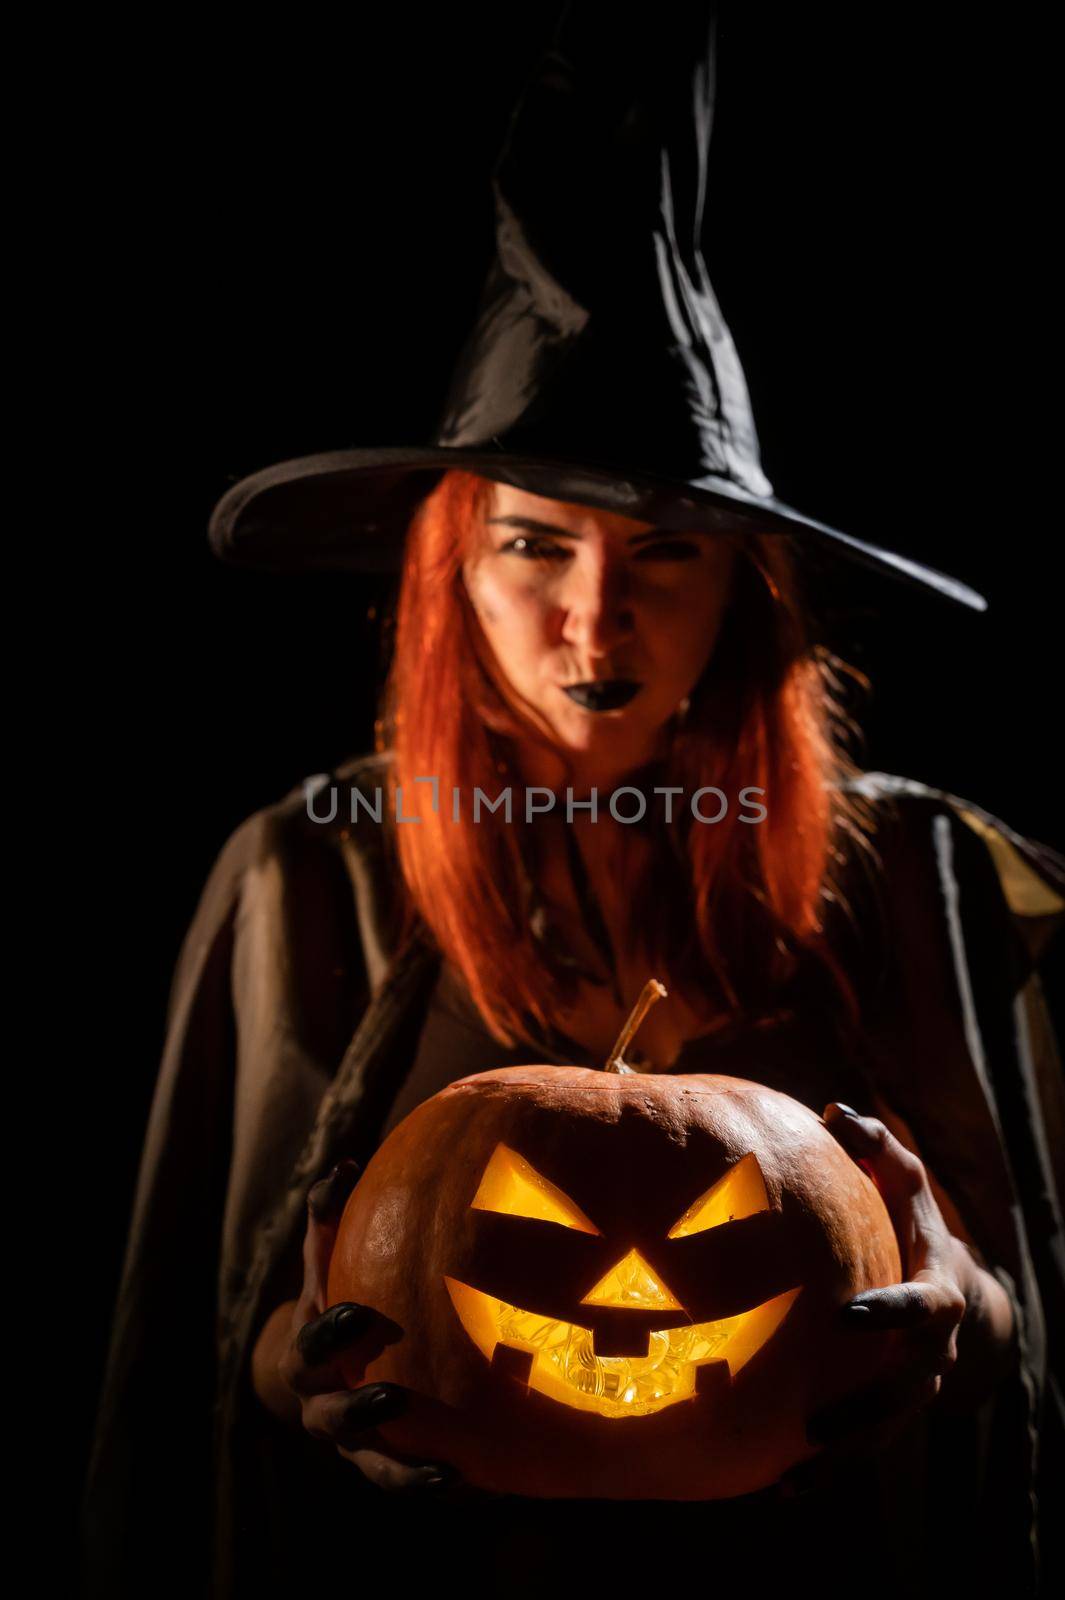 Wicked witch holding a jack-o-lantern for halloween by mrwed54